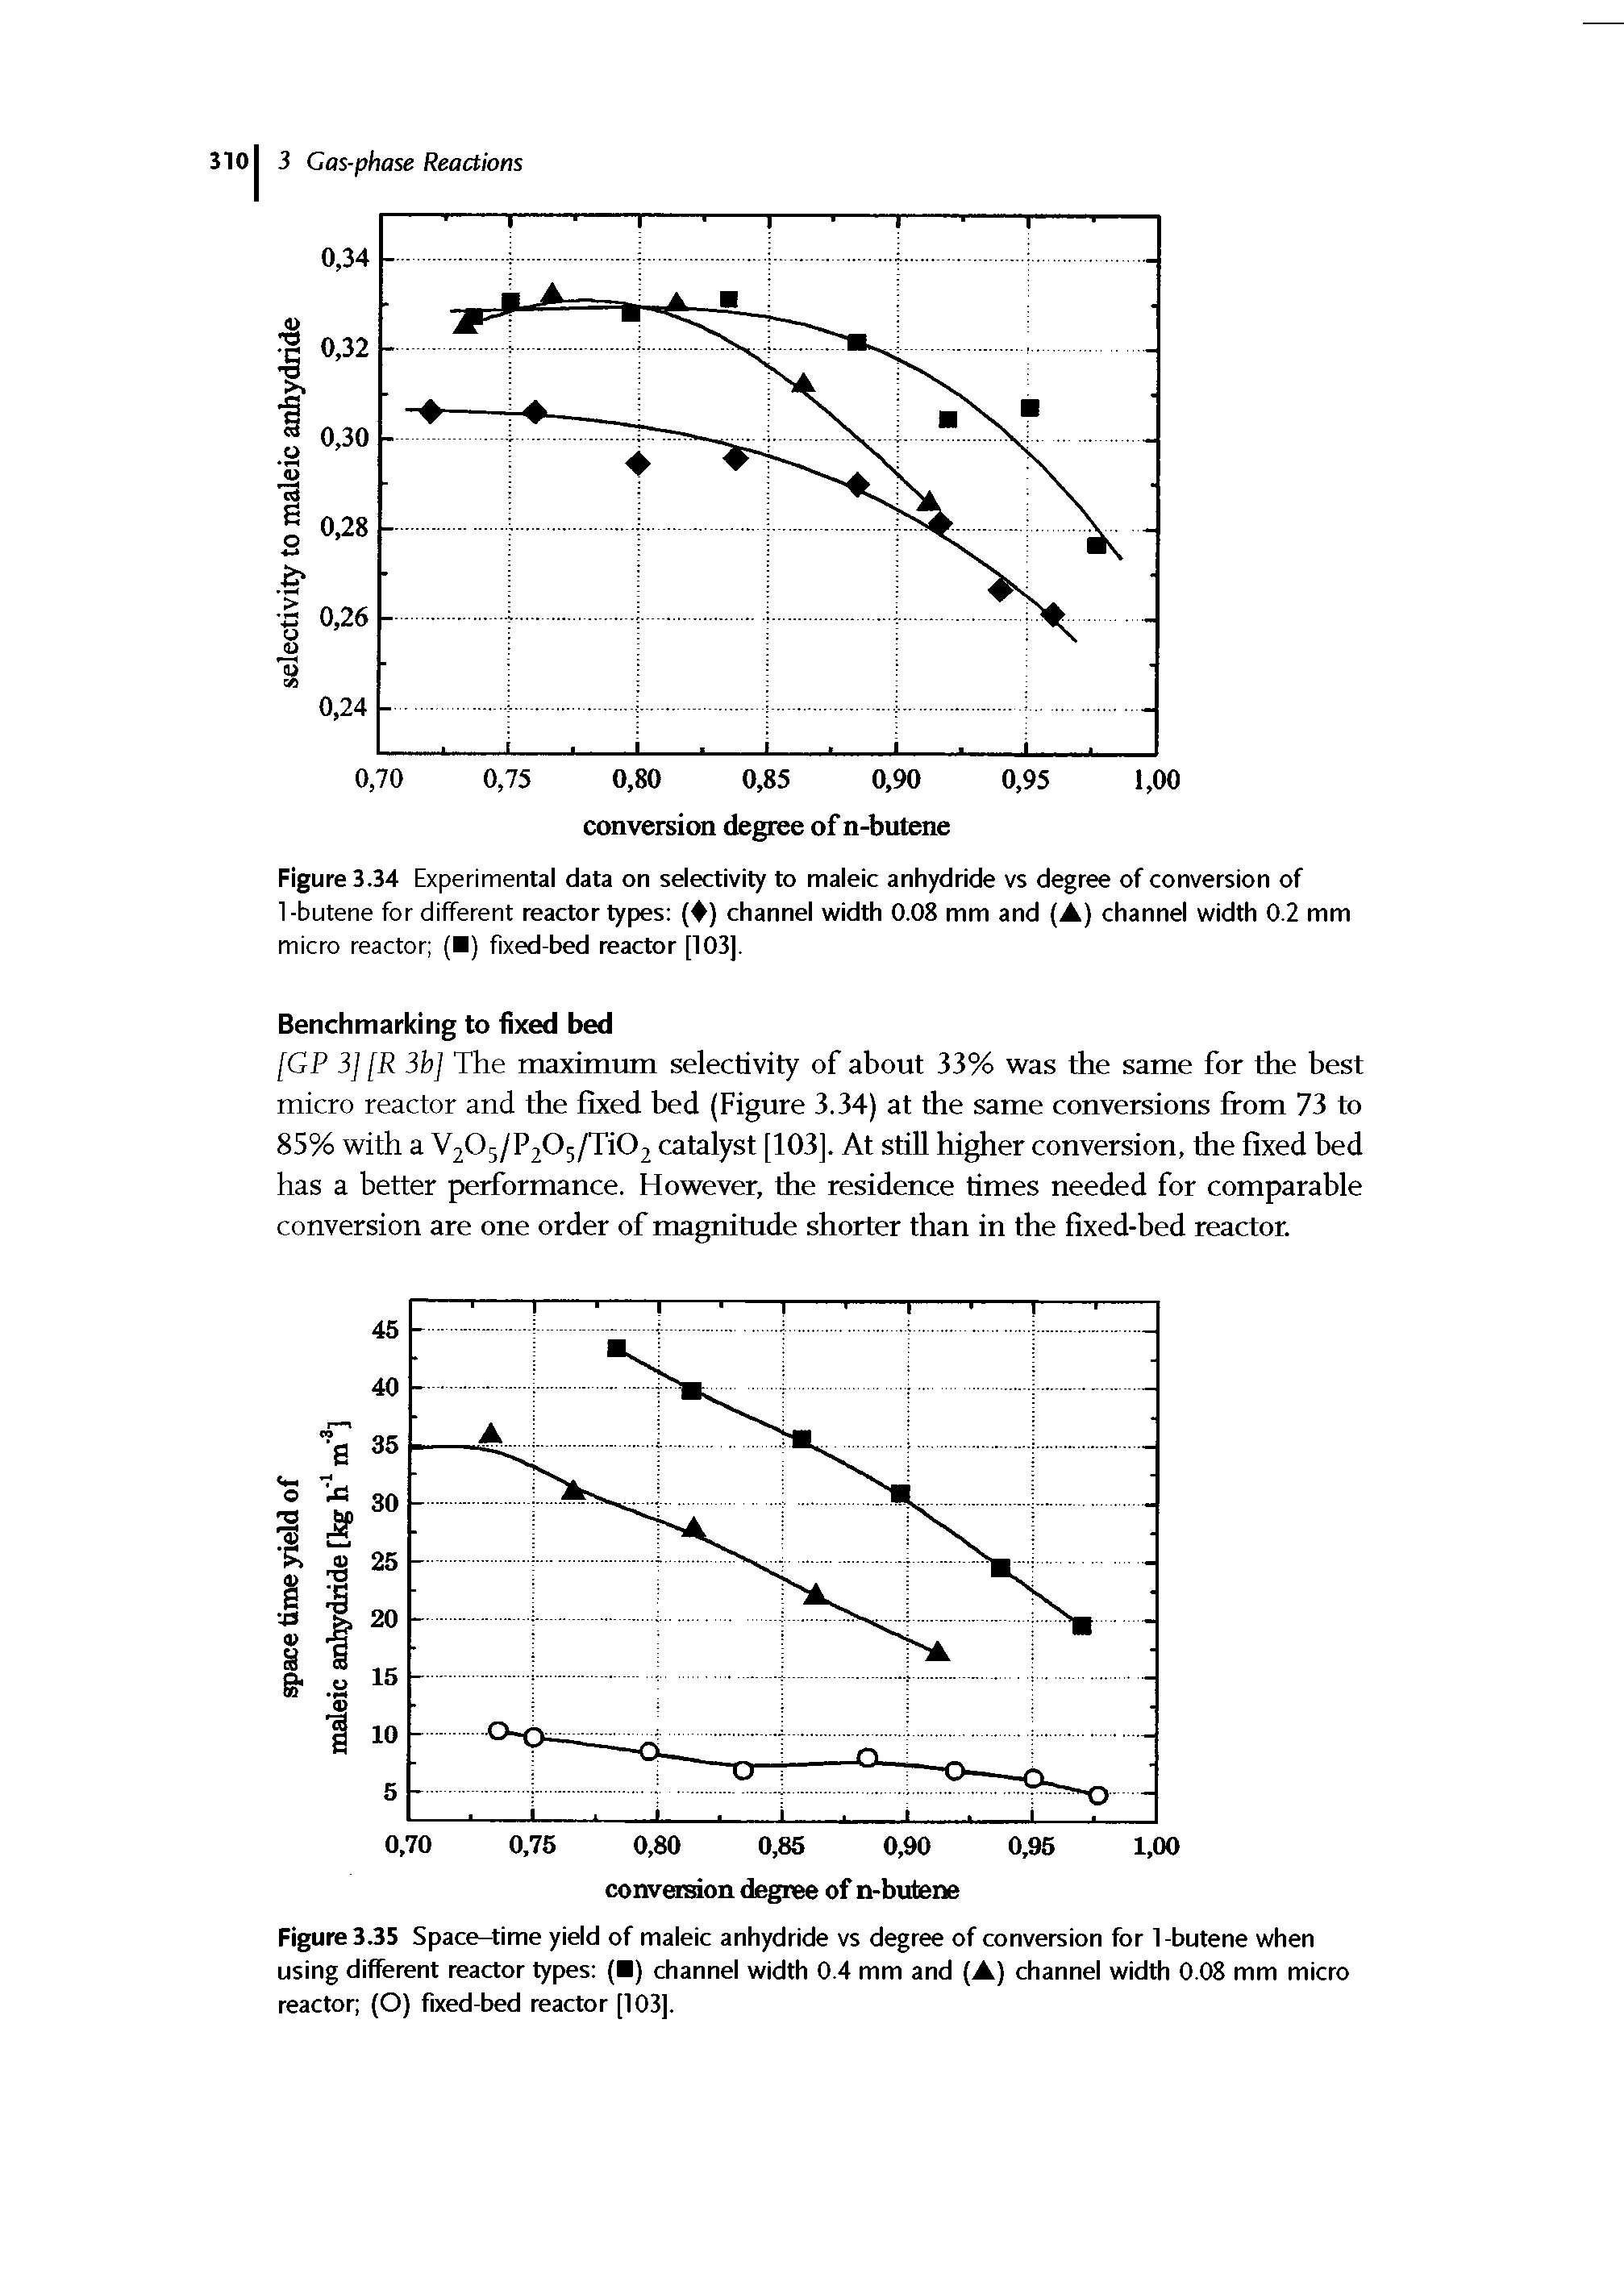 Figure 3.34 Experimental data on selectivity to maleic anhydride vs degree of conversion of 1-butene for different reactor types ( ) channel width 0.08 mm and (A) channel width 0.2 mm micro reactor ( ) fixed-bed reactor [103],...